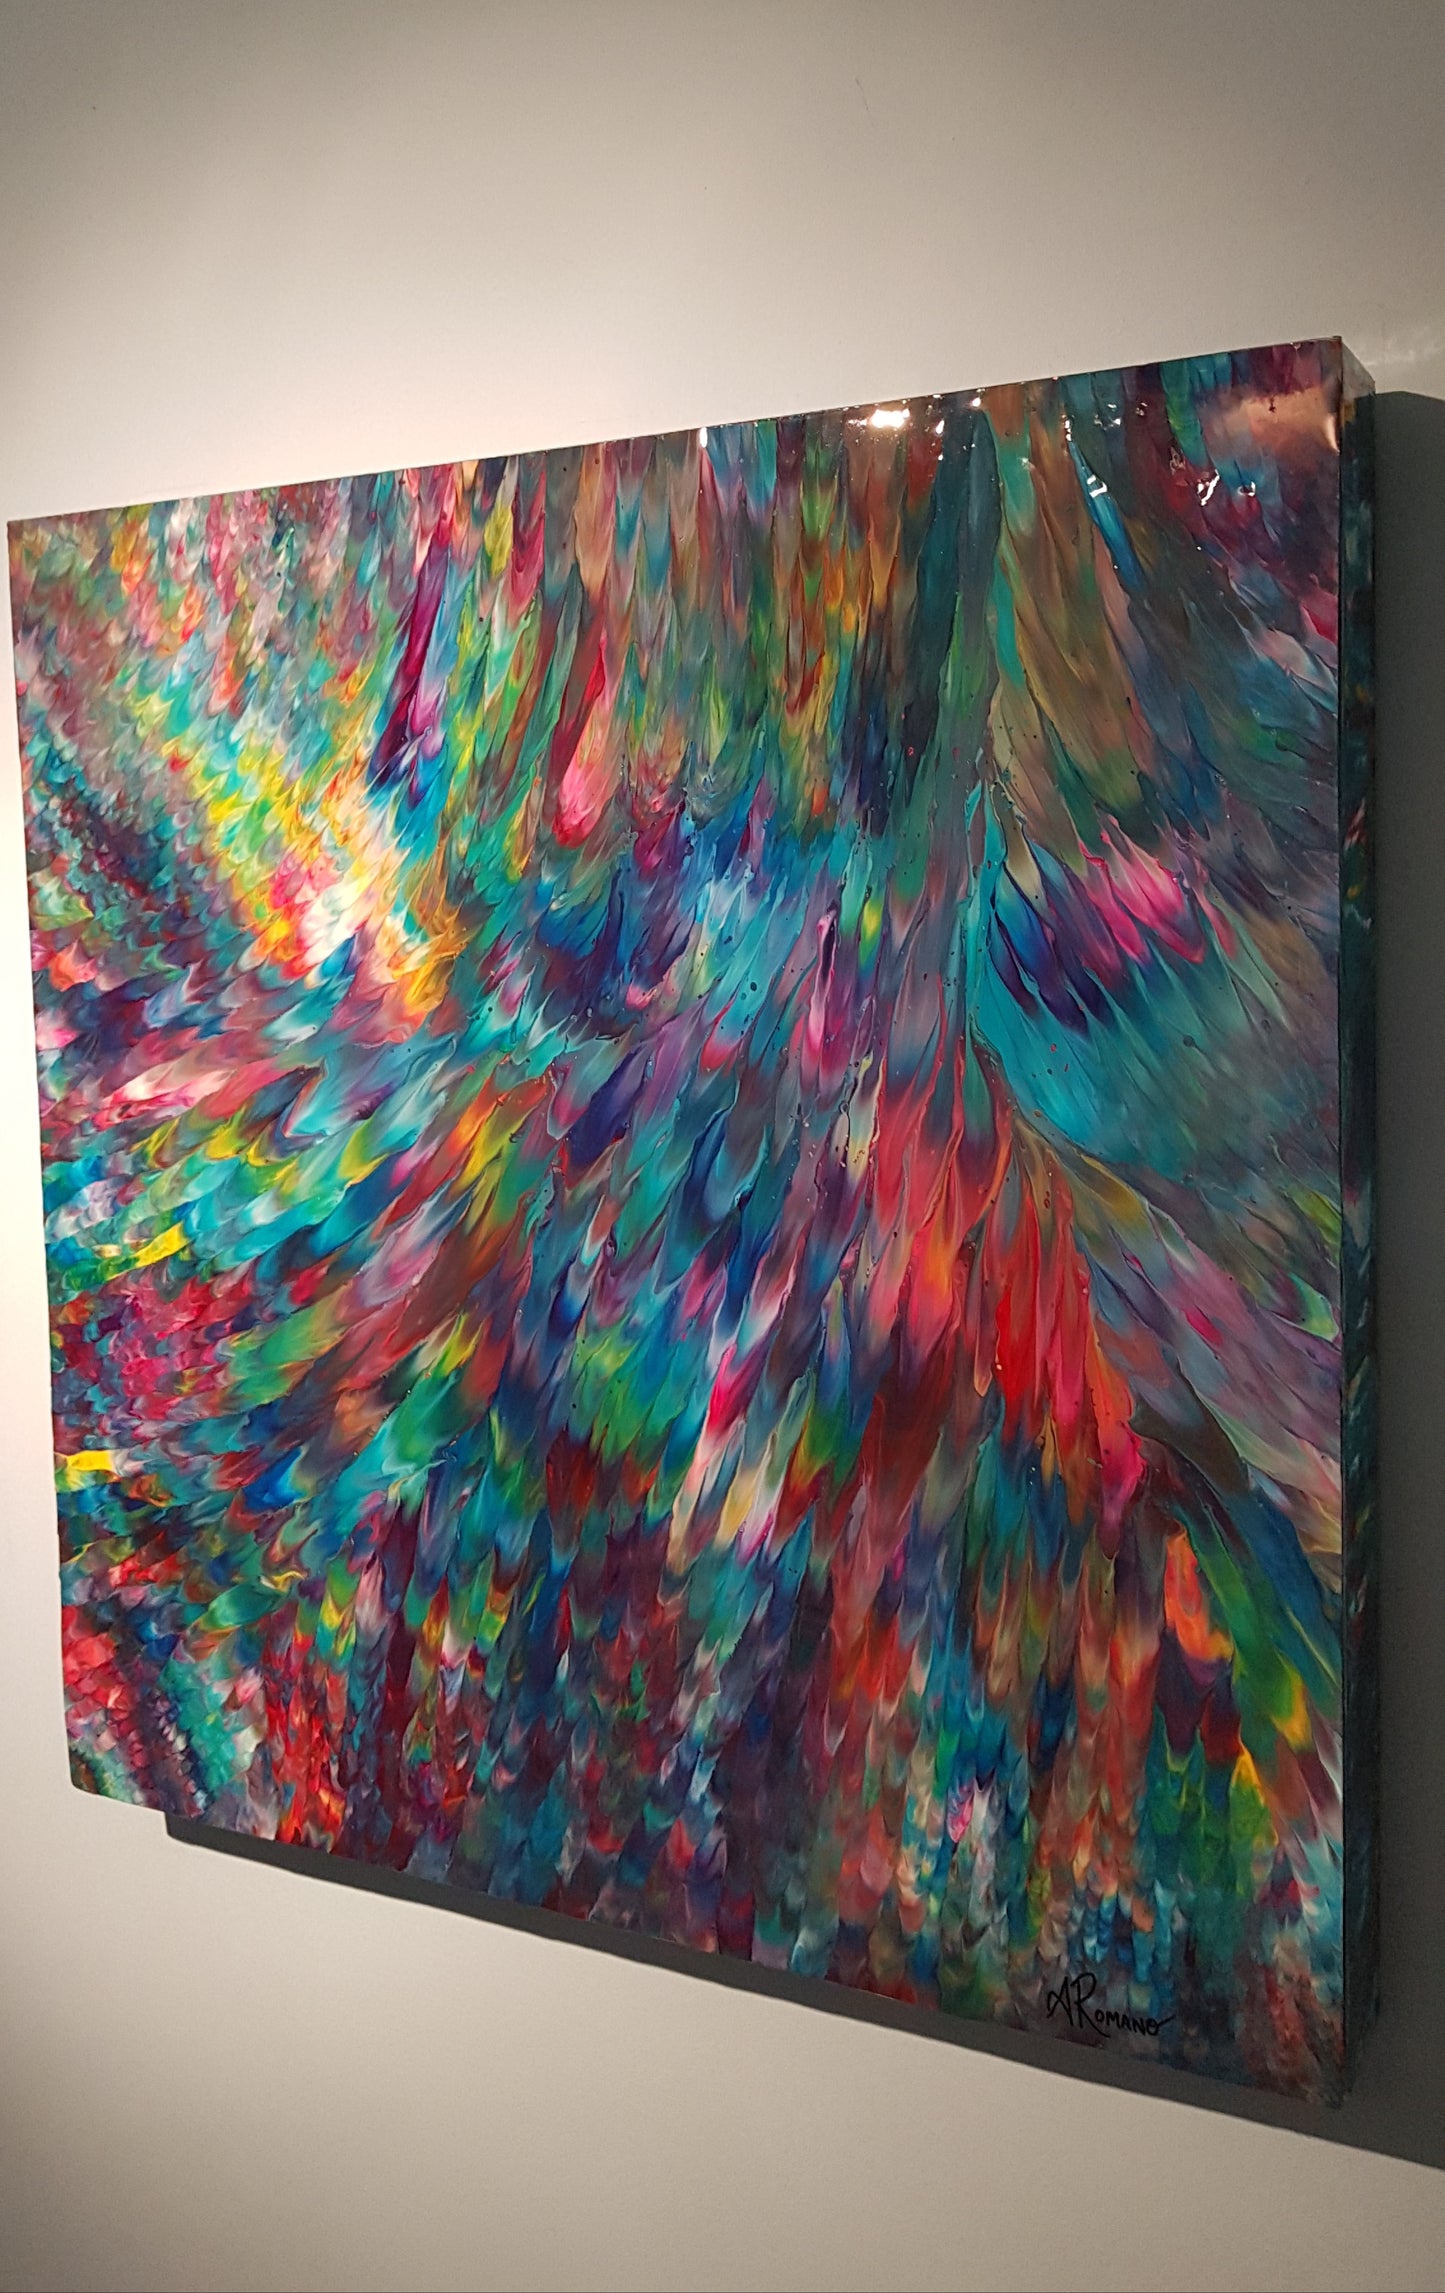 Psychedelic Waterfall No. 6 | 32" x 32"